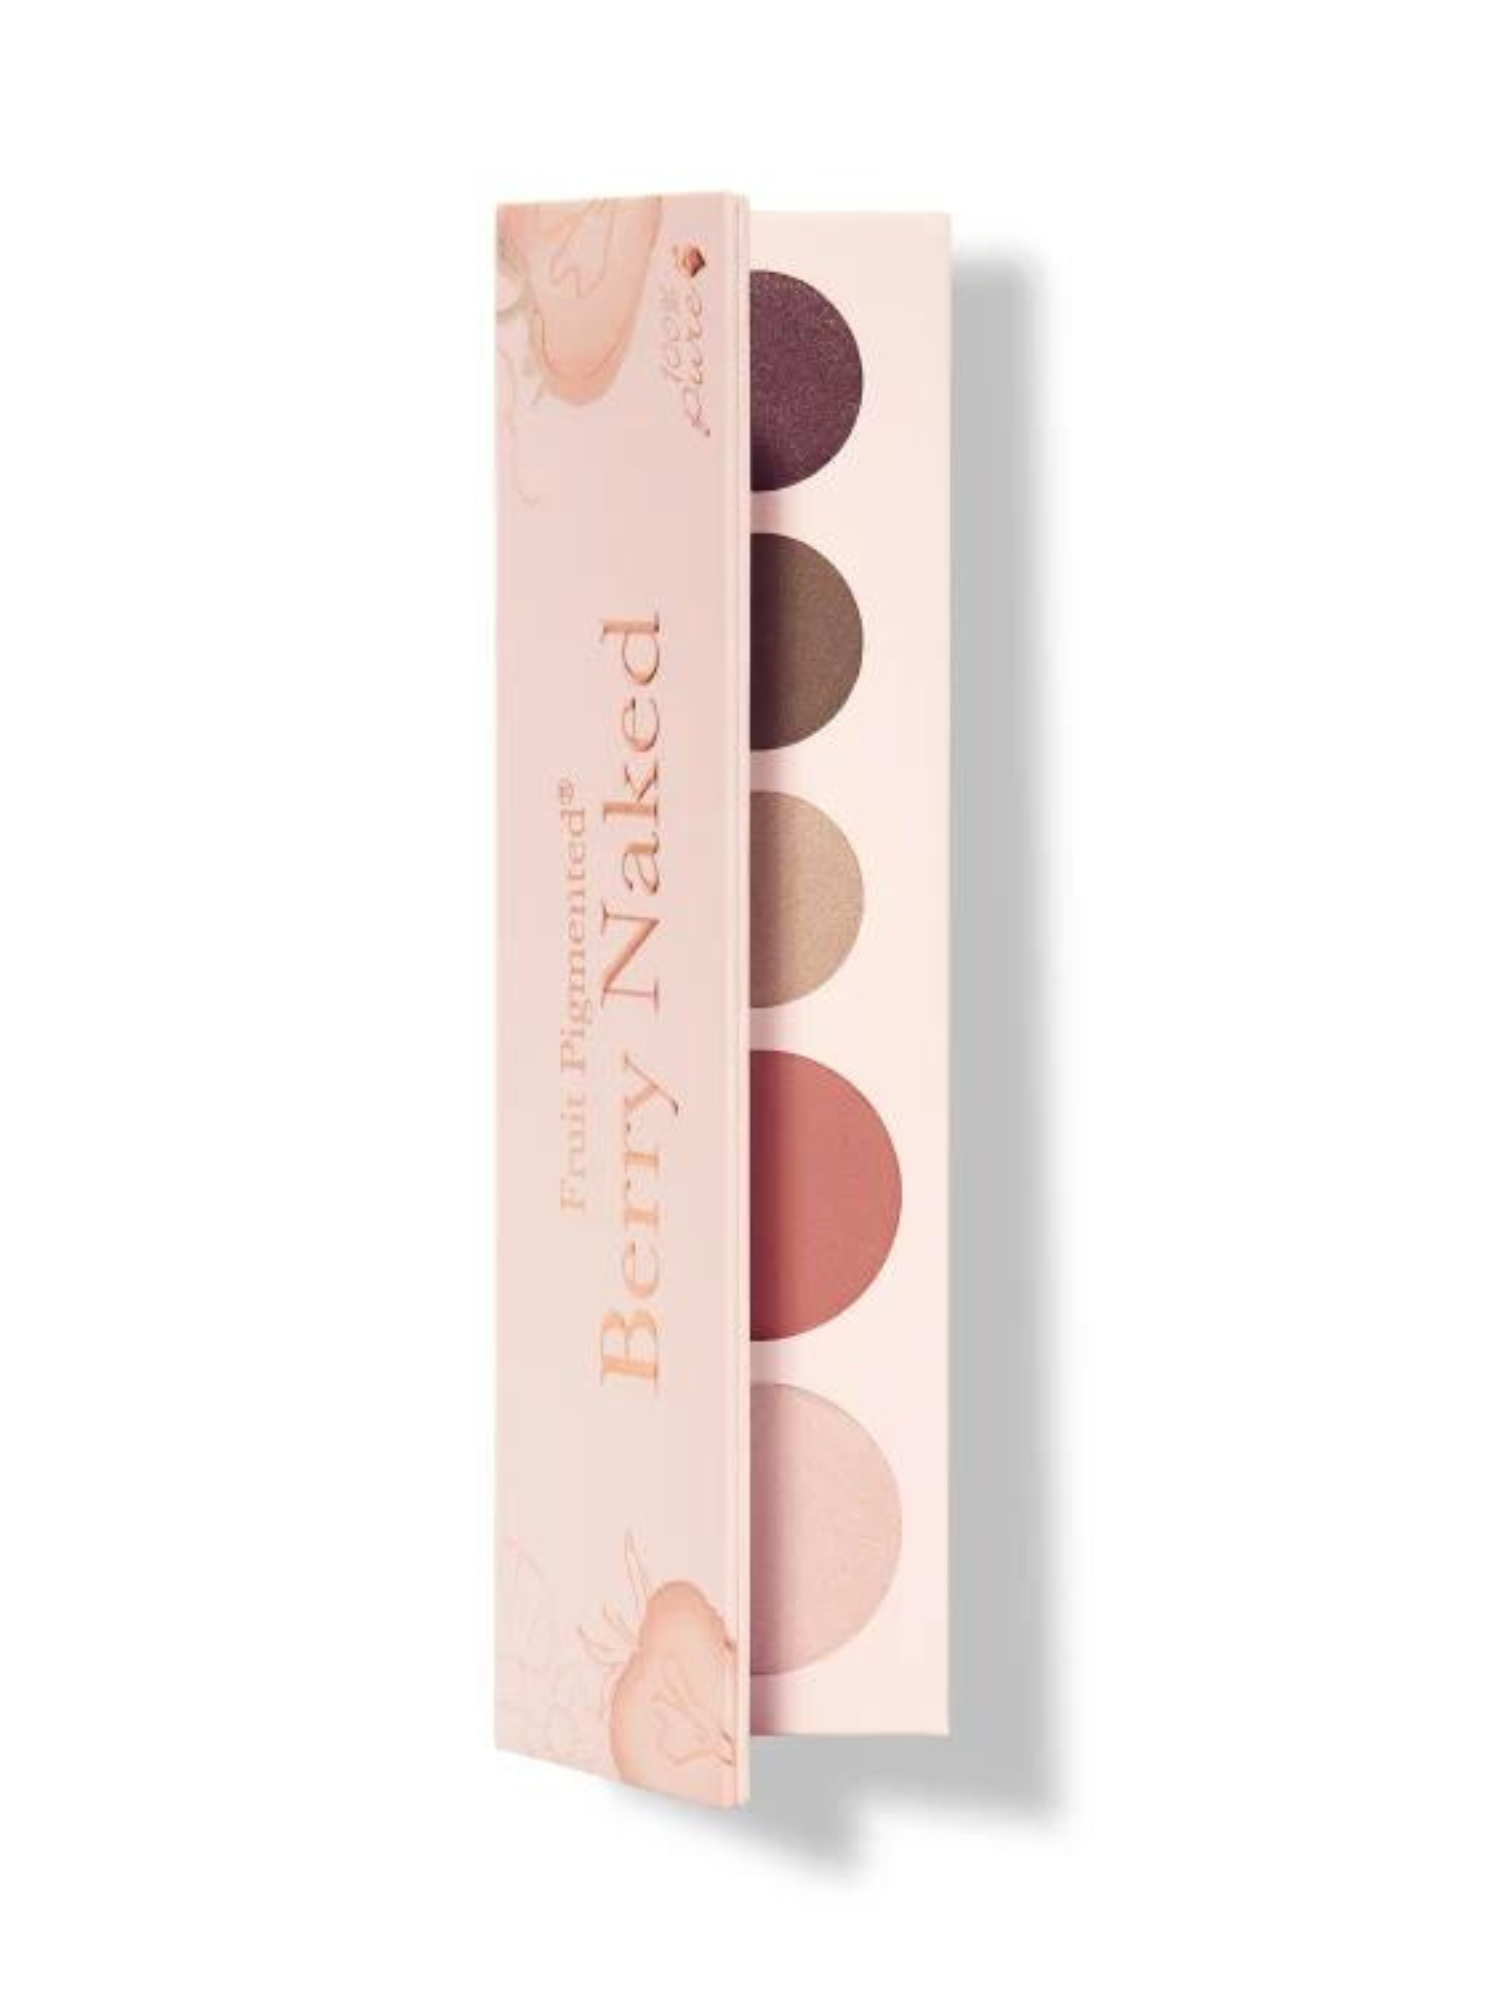 Fruit Pigmented Berry Naked Palette